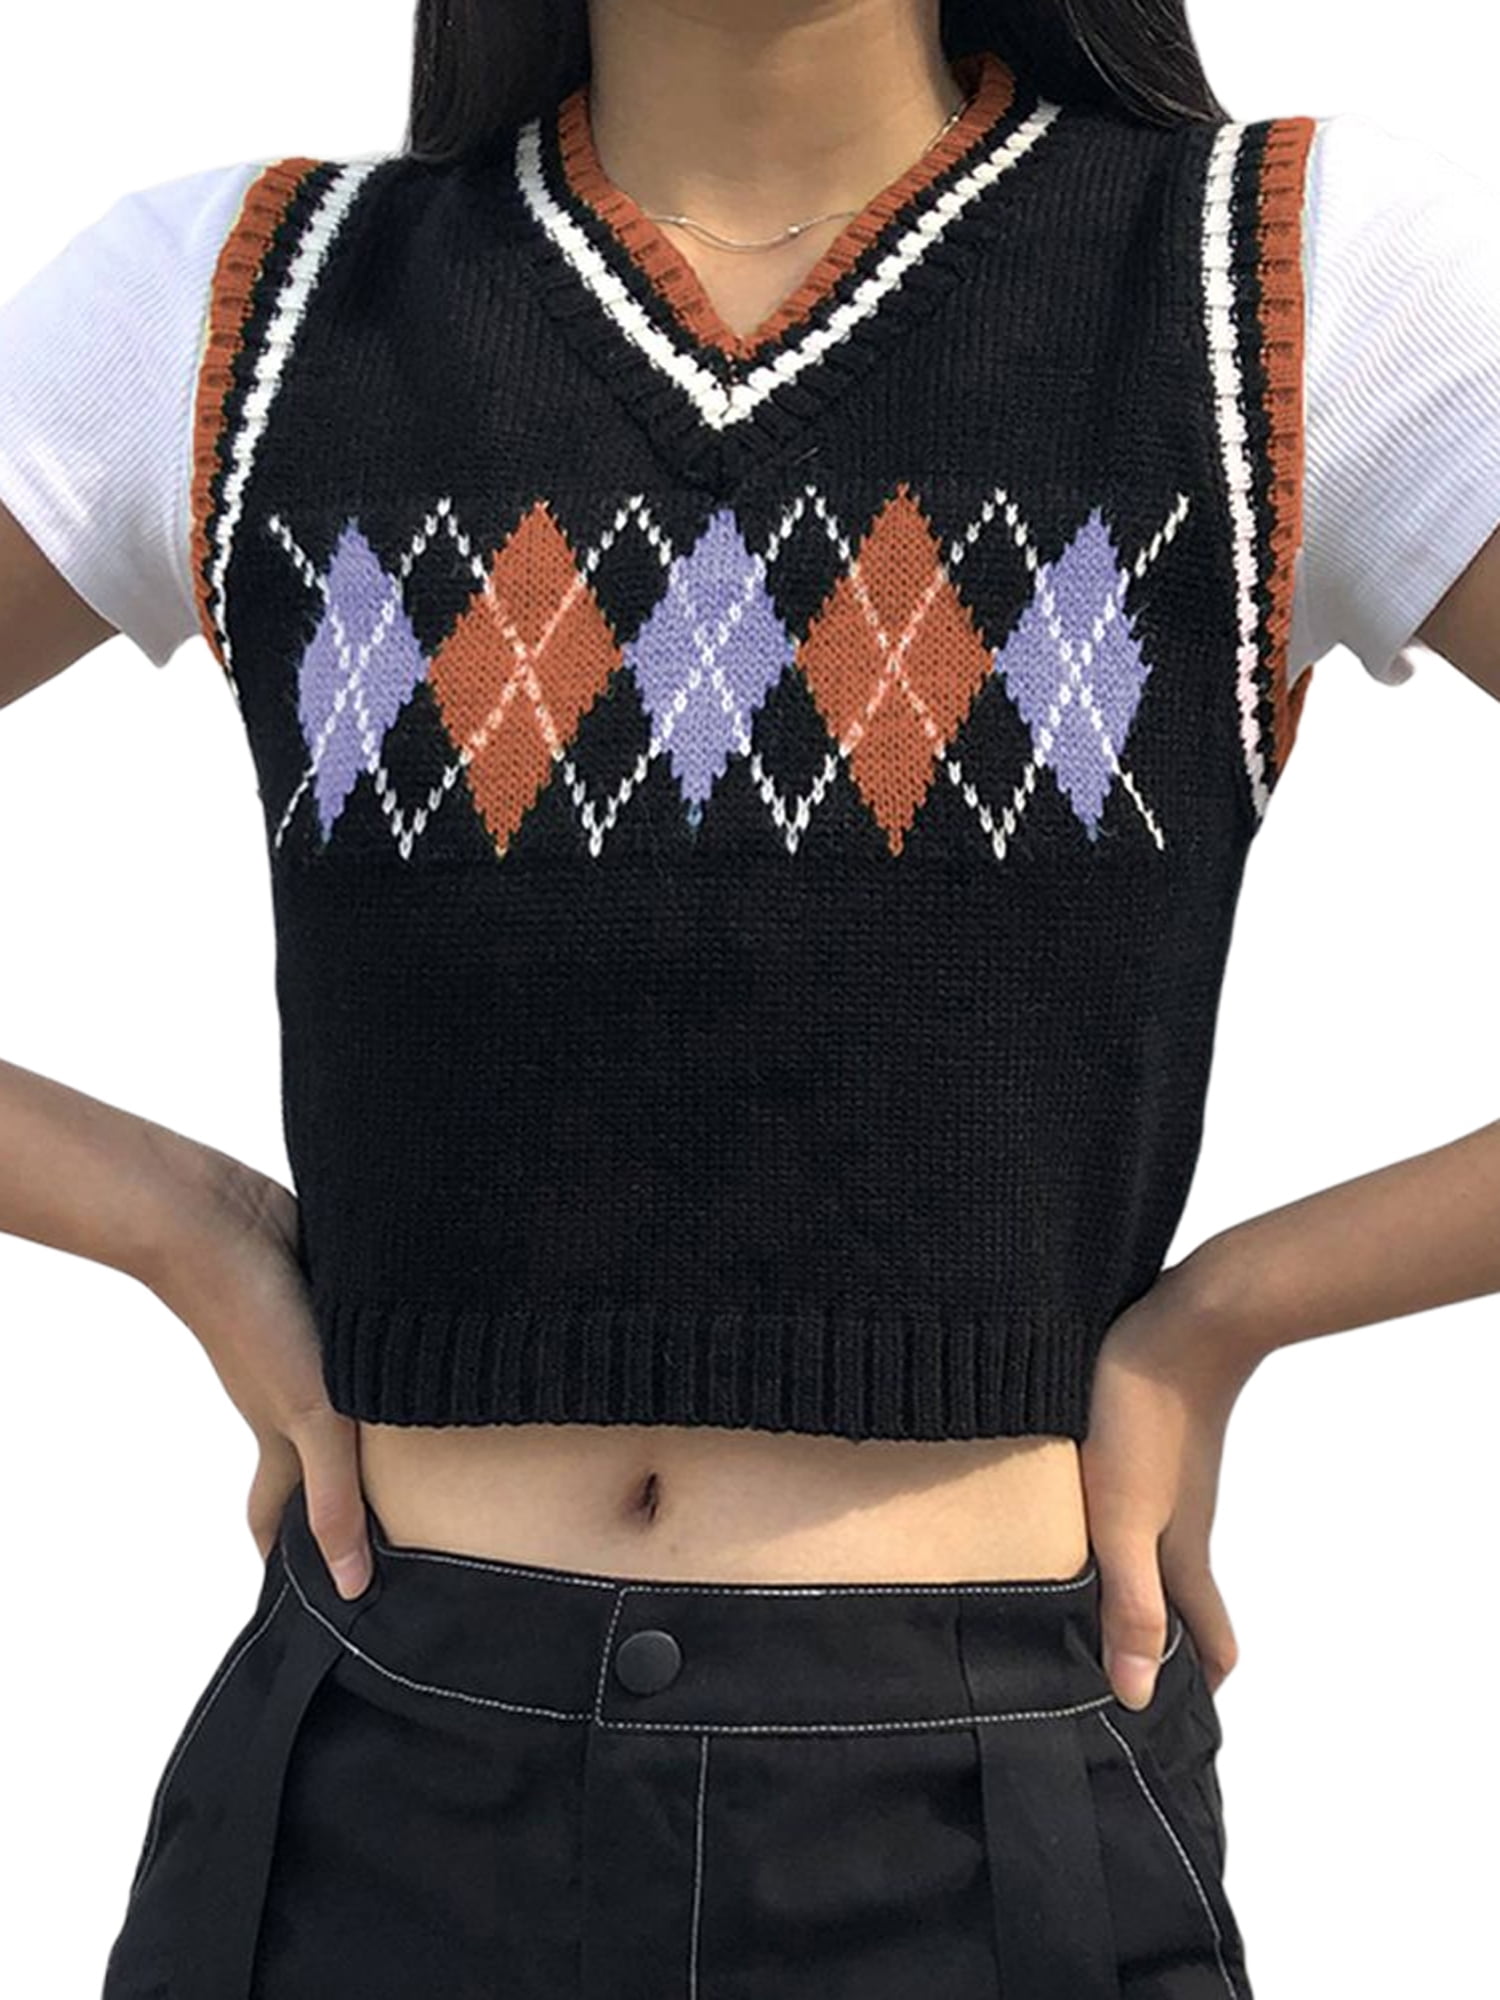 Women Sleeveless Plaid Knitted Crop Top Knitwear Backless Camisole Sweater Vest